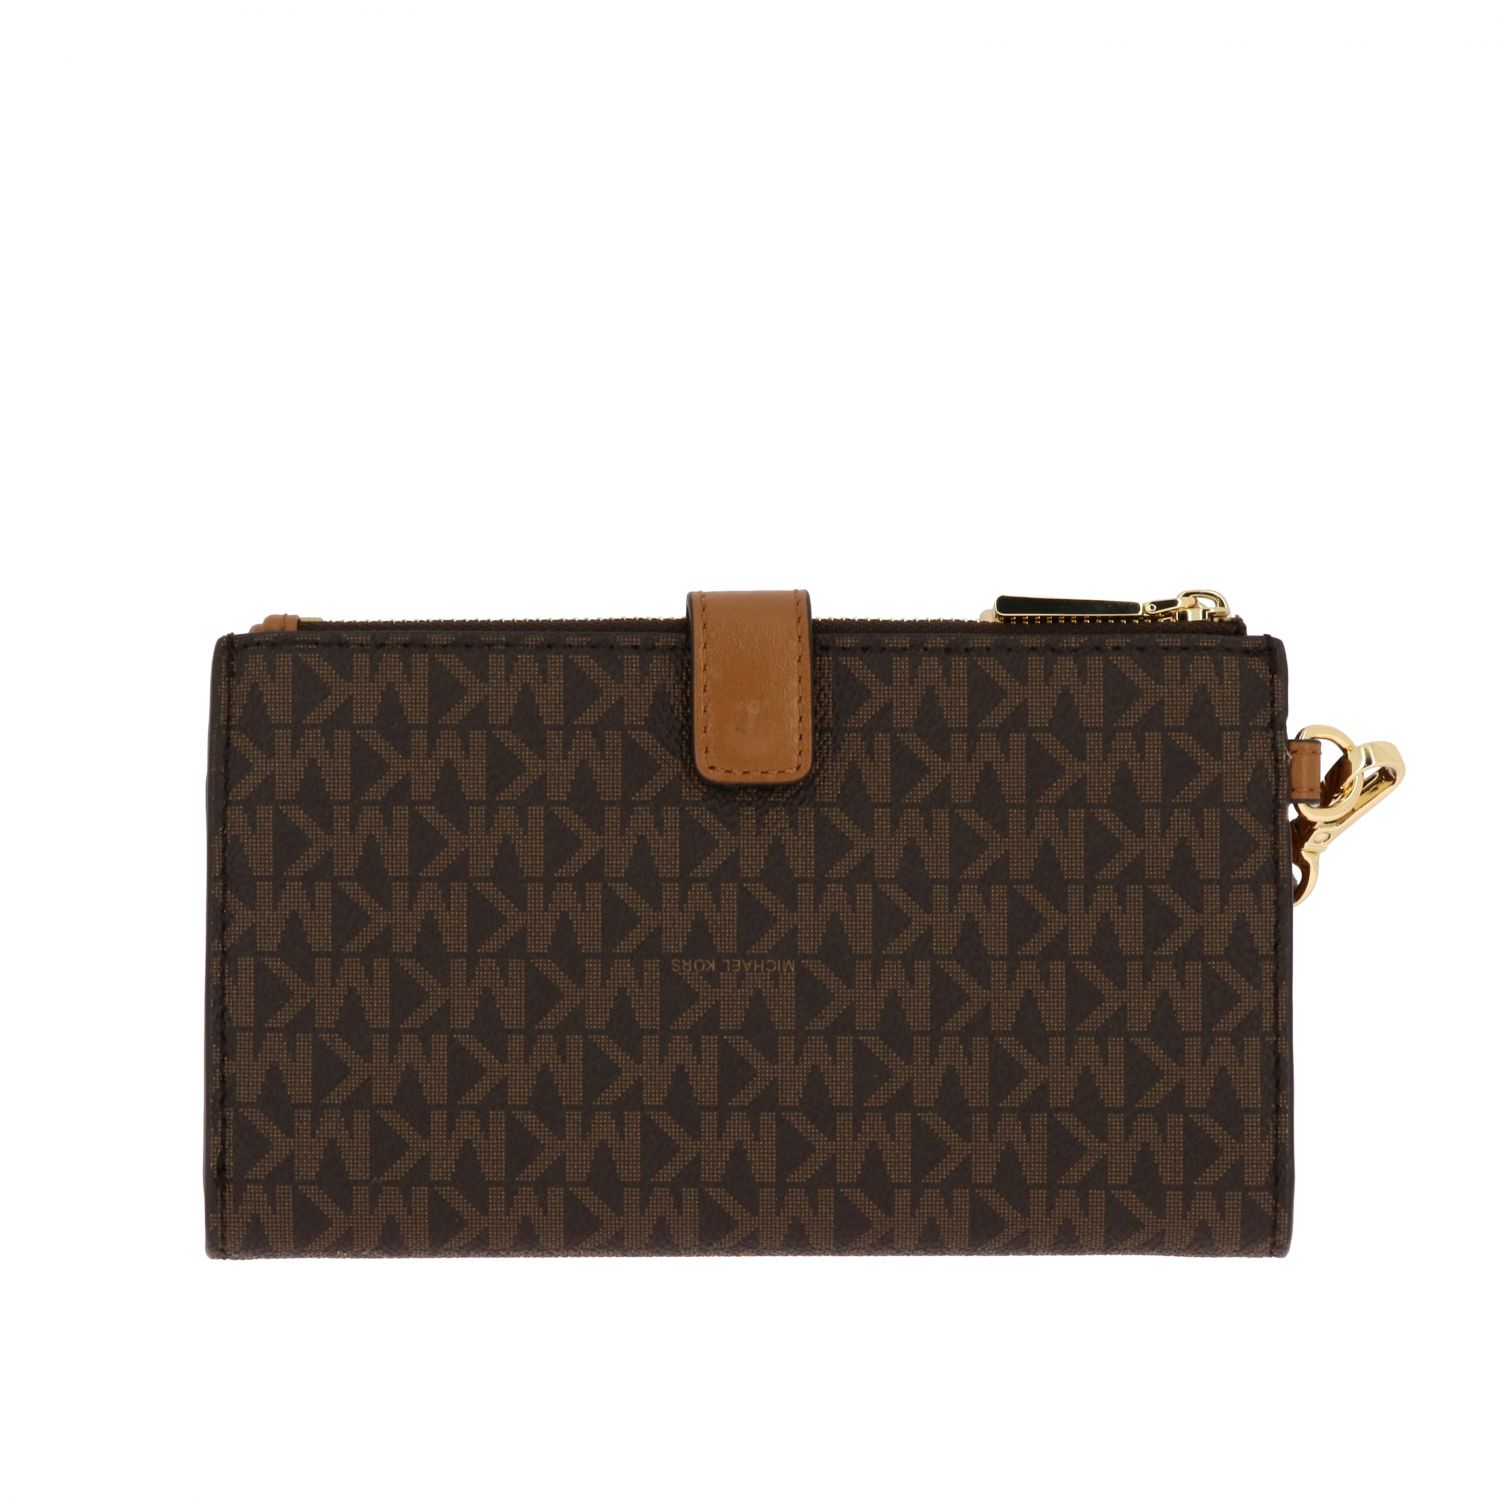 Michael Michael Kors Outlet: wallet with MK print | Wallet Michael ...